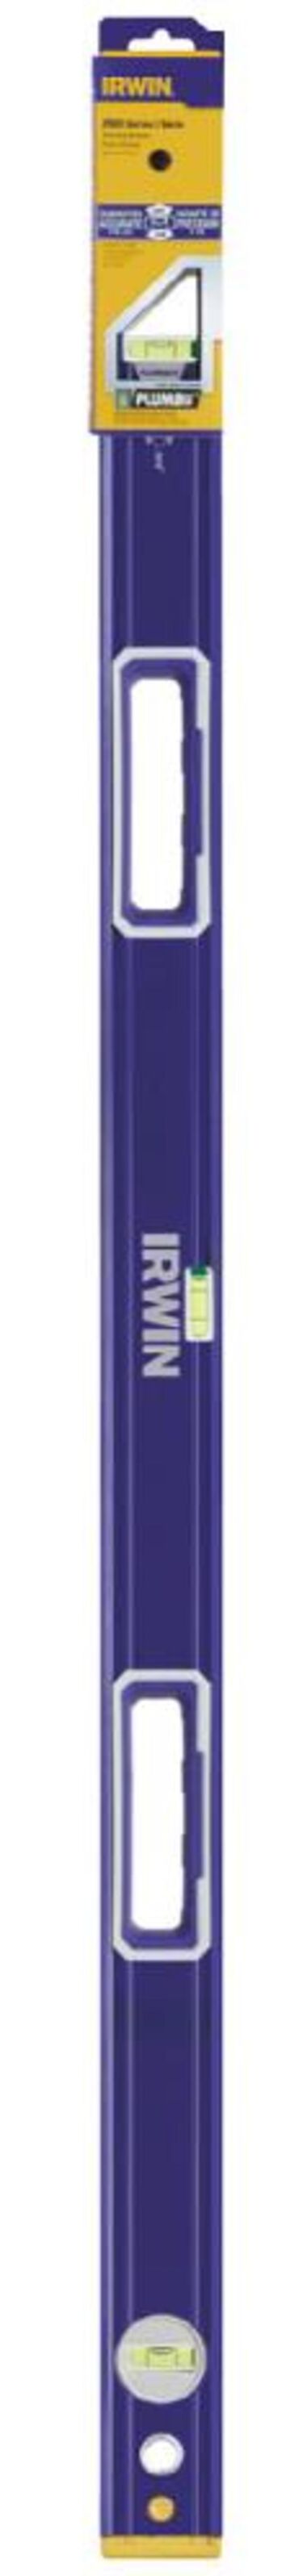 Irwin 48 In. 2500 Box Beam Level, large image number 0